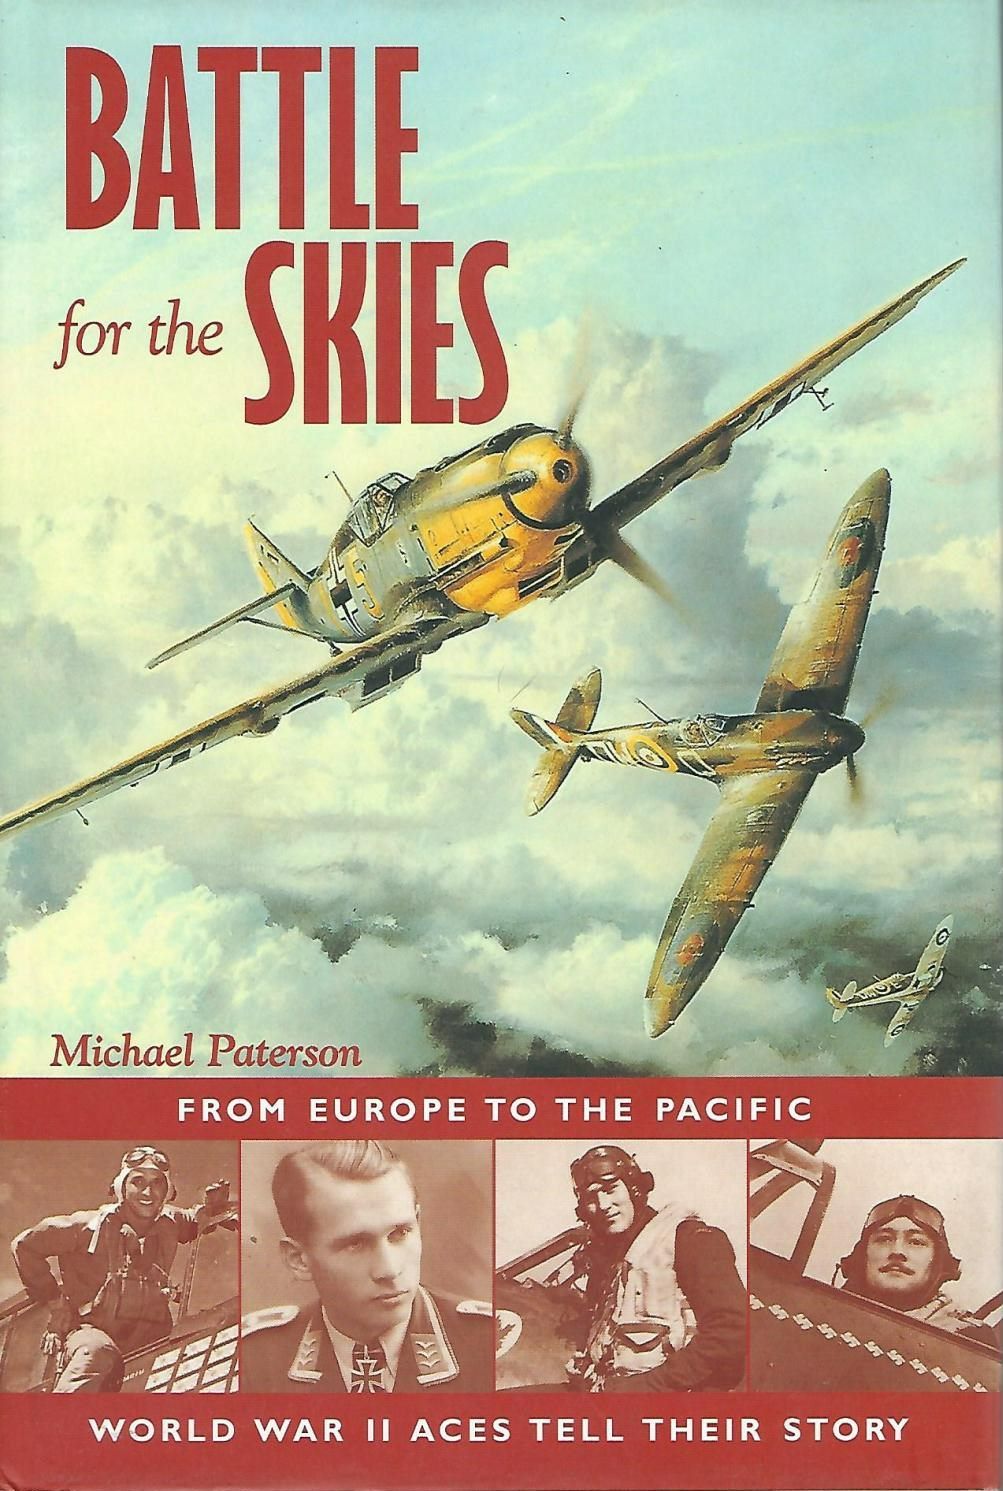 BATTLE FOR THE SKIES: From Europe to the Pacific